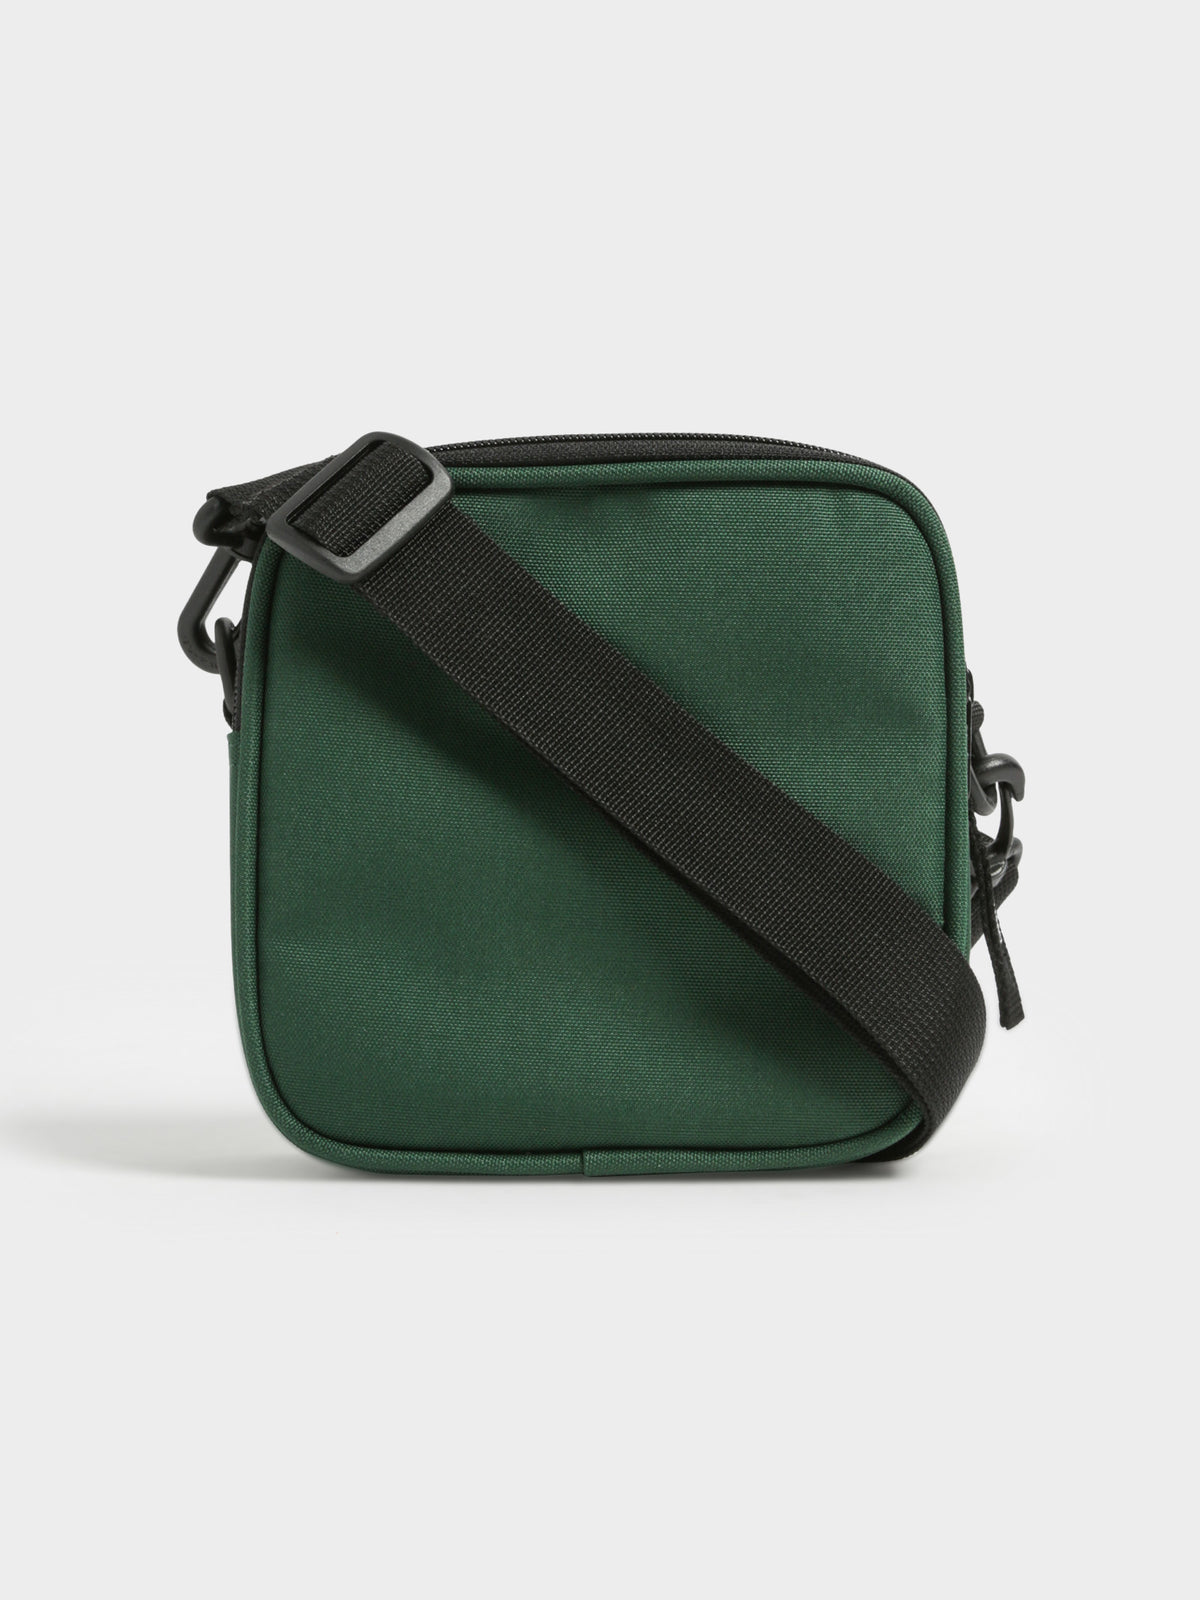 Essentials Bag in Treehouse Green